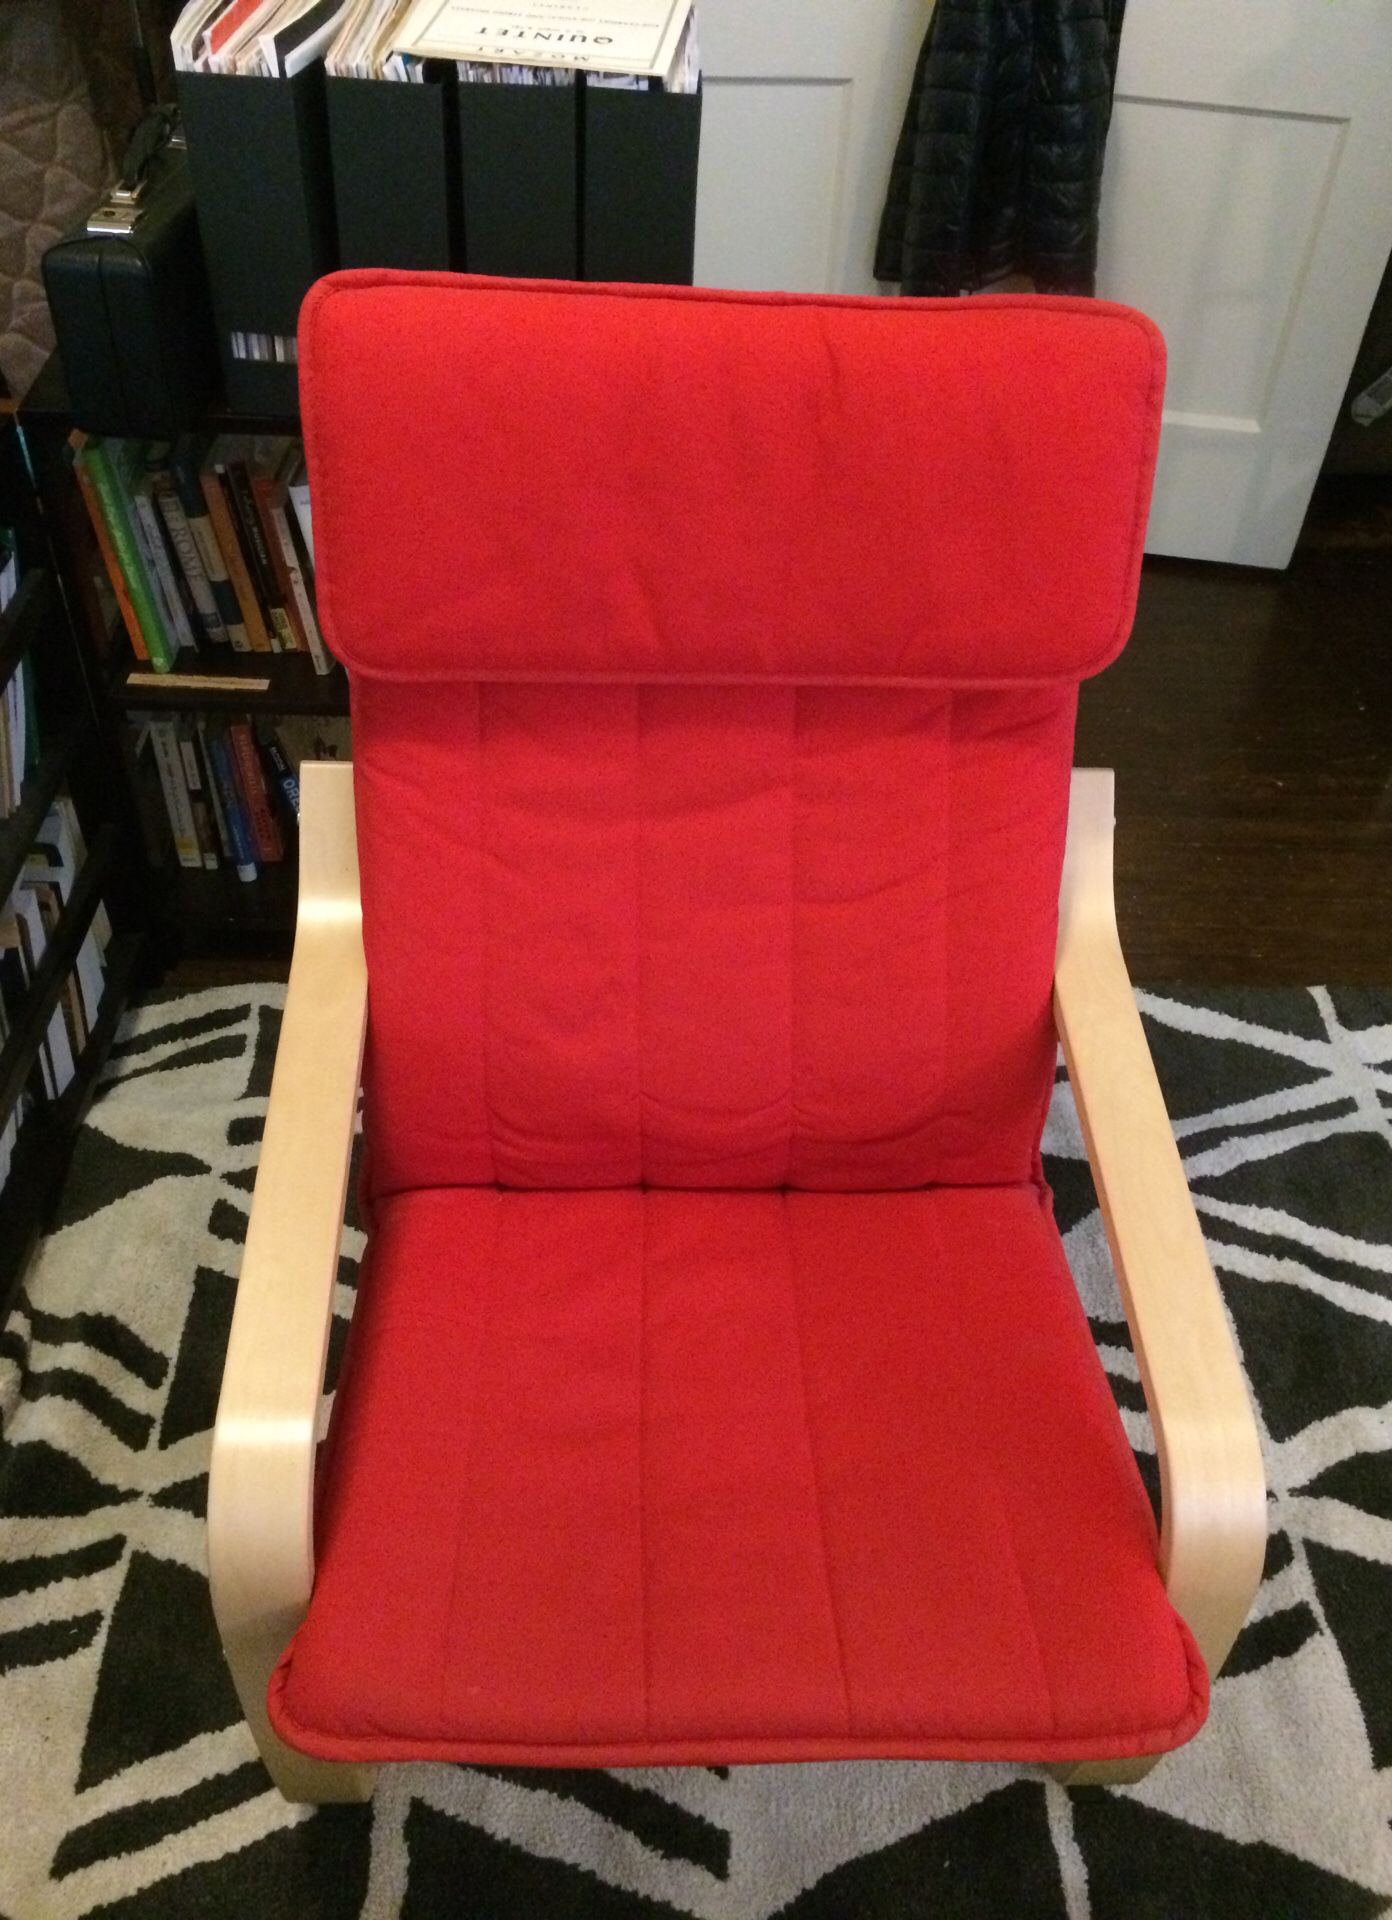 IKEA POANG Armchair with Ransta Red cushion